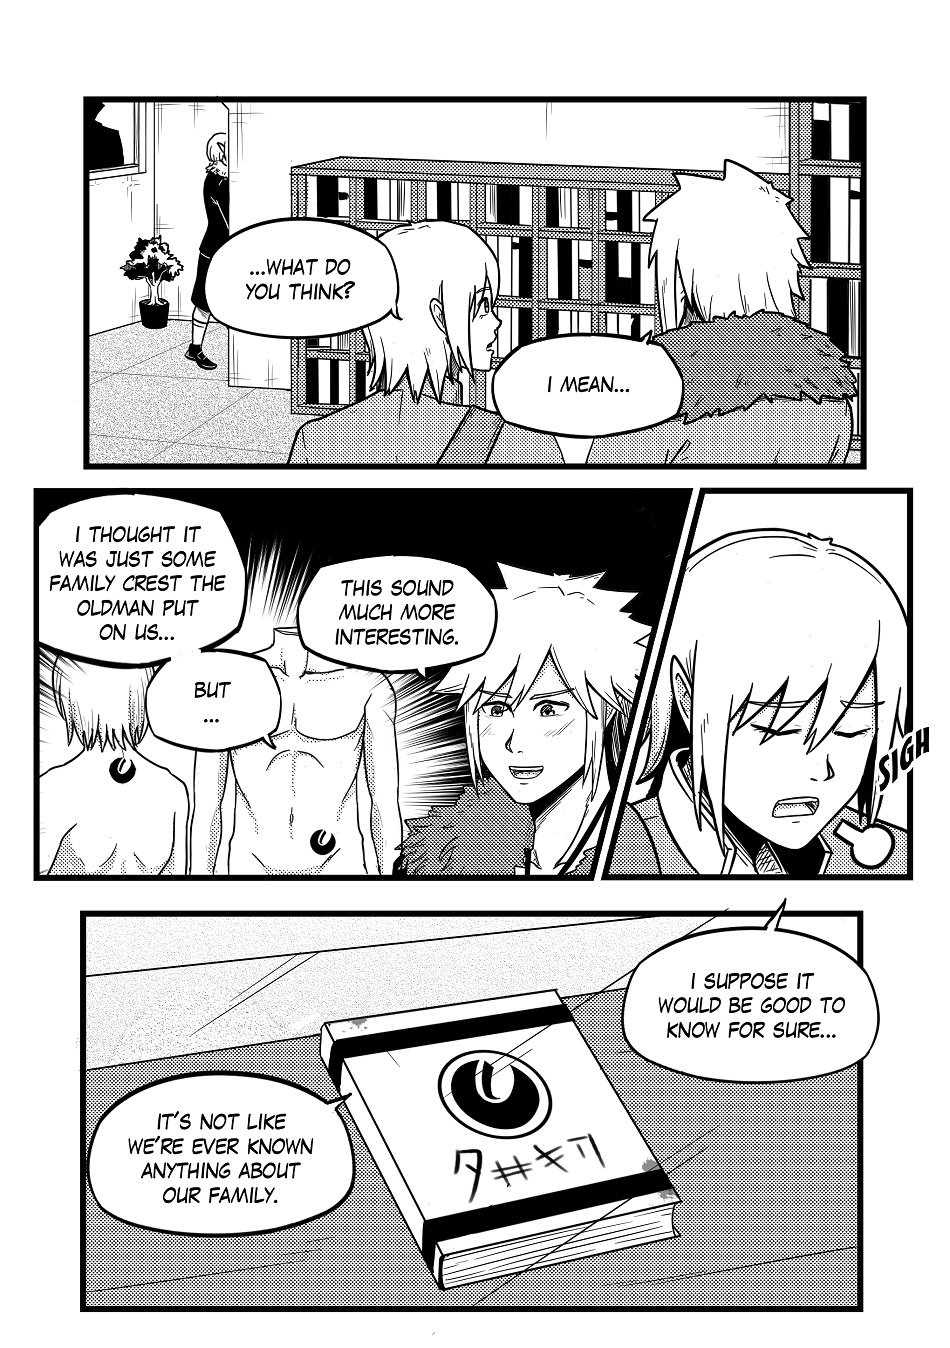 DAWN: Chapter 2 Pages 14-17